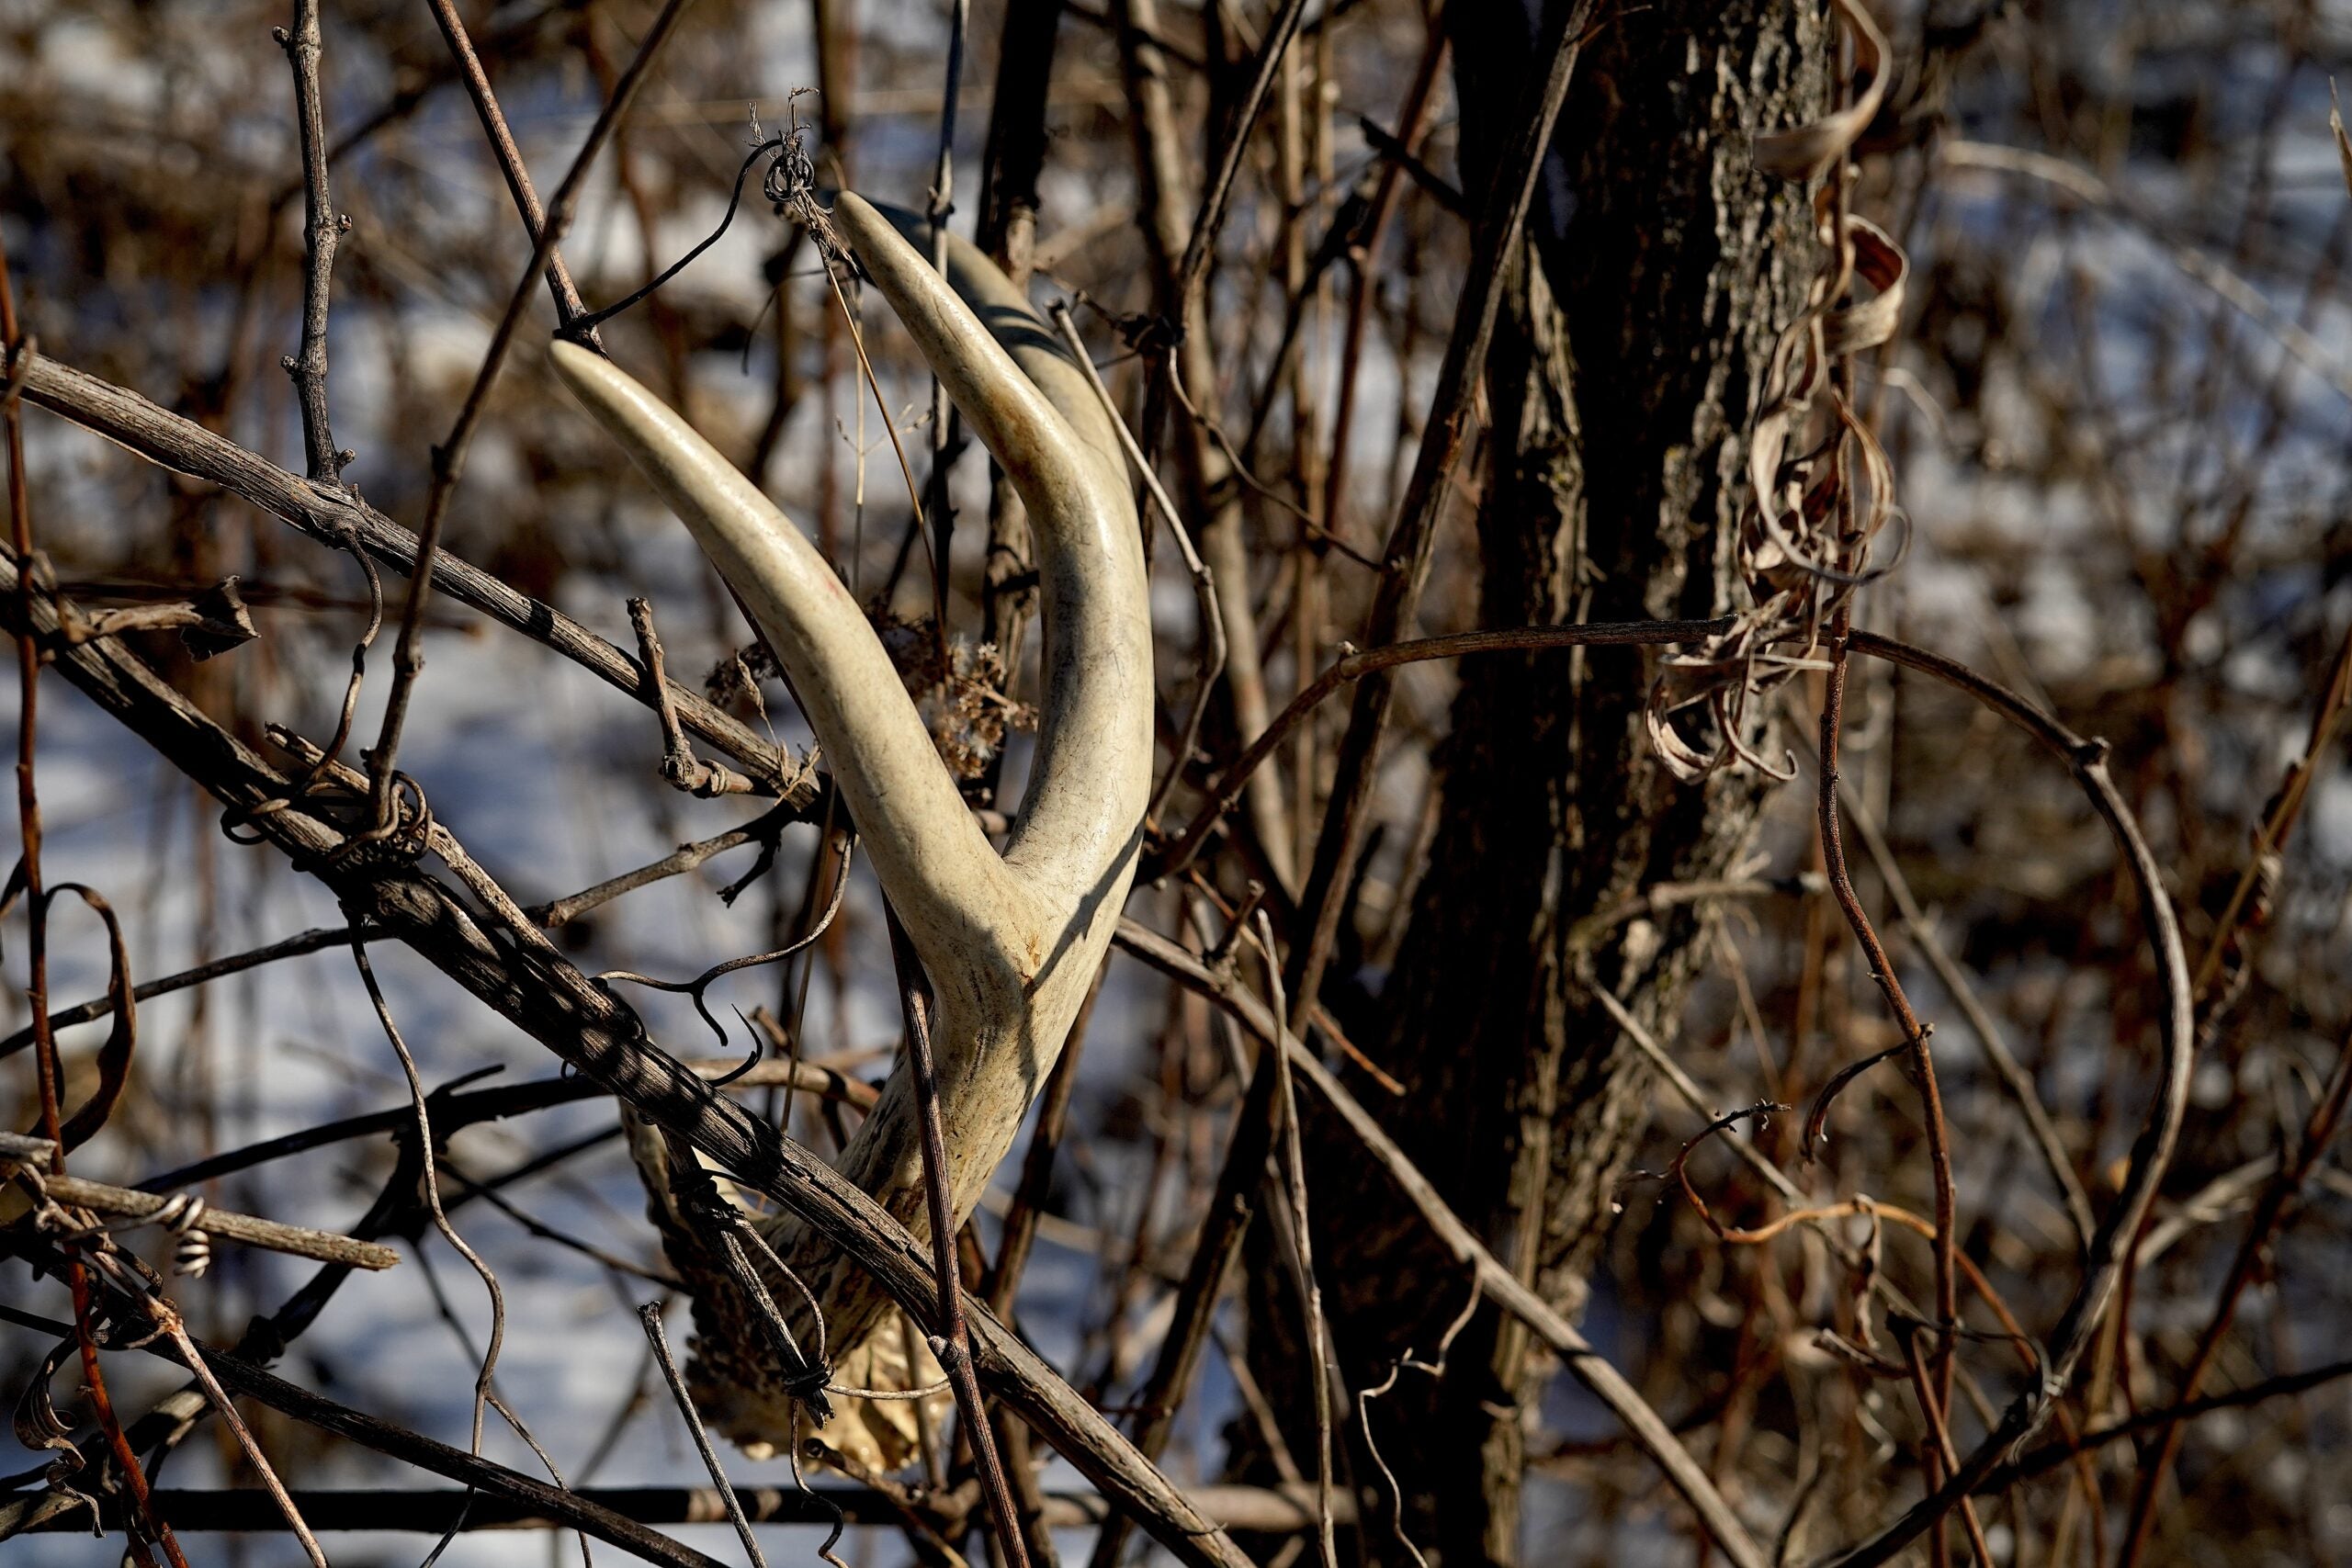 photo of shed antler tangled in a bush